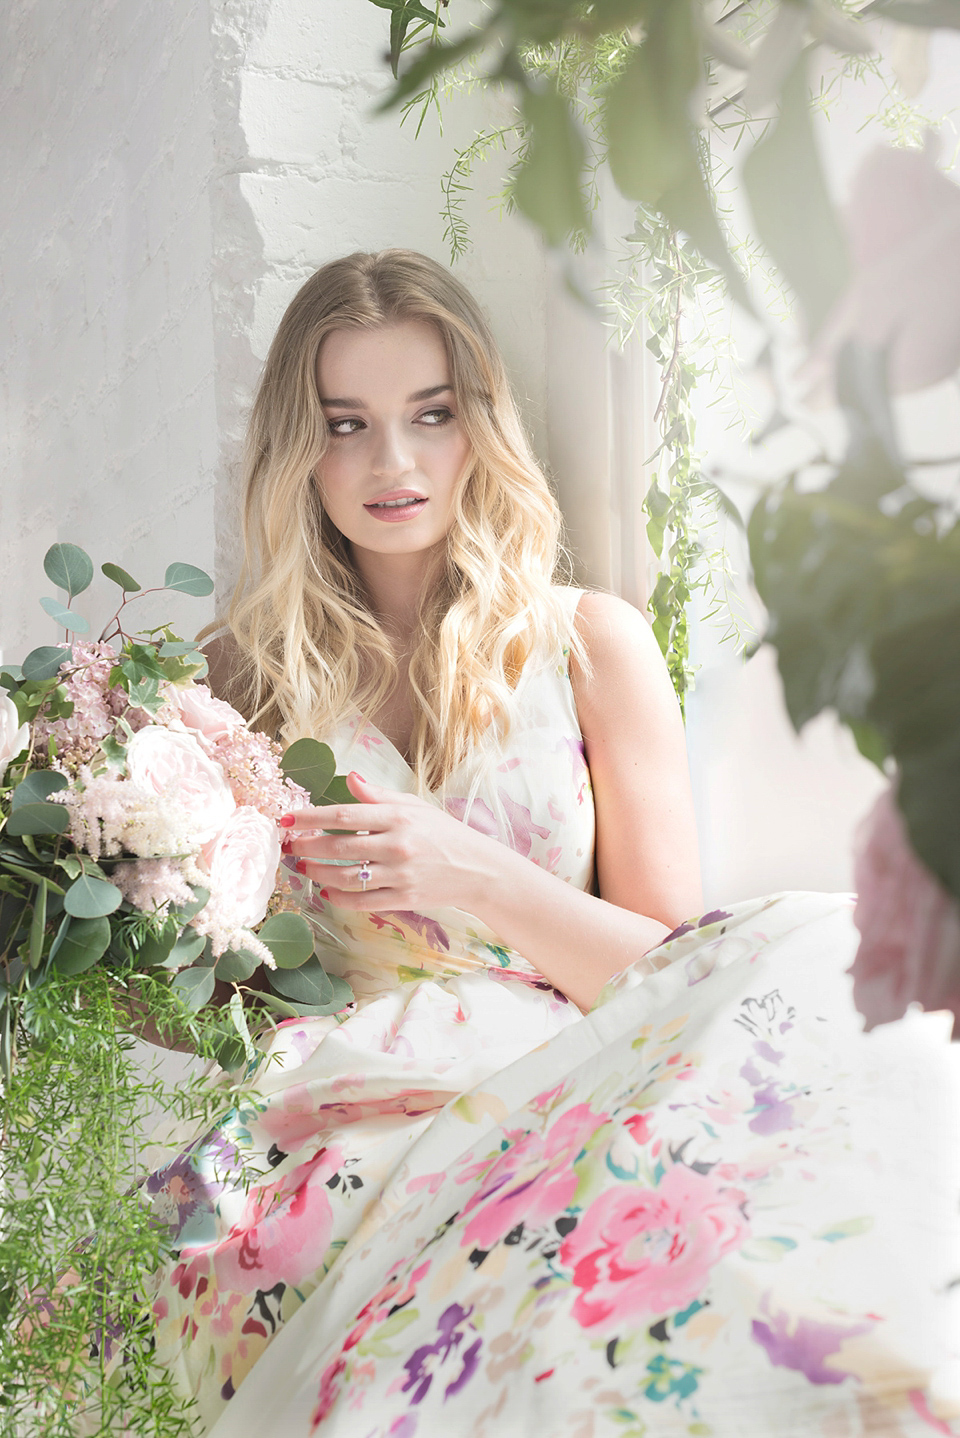 Untamed Love, the beautiful and floral inspired new collection for 2017 by Charlotte Balbier.